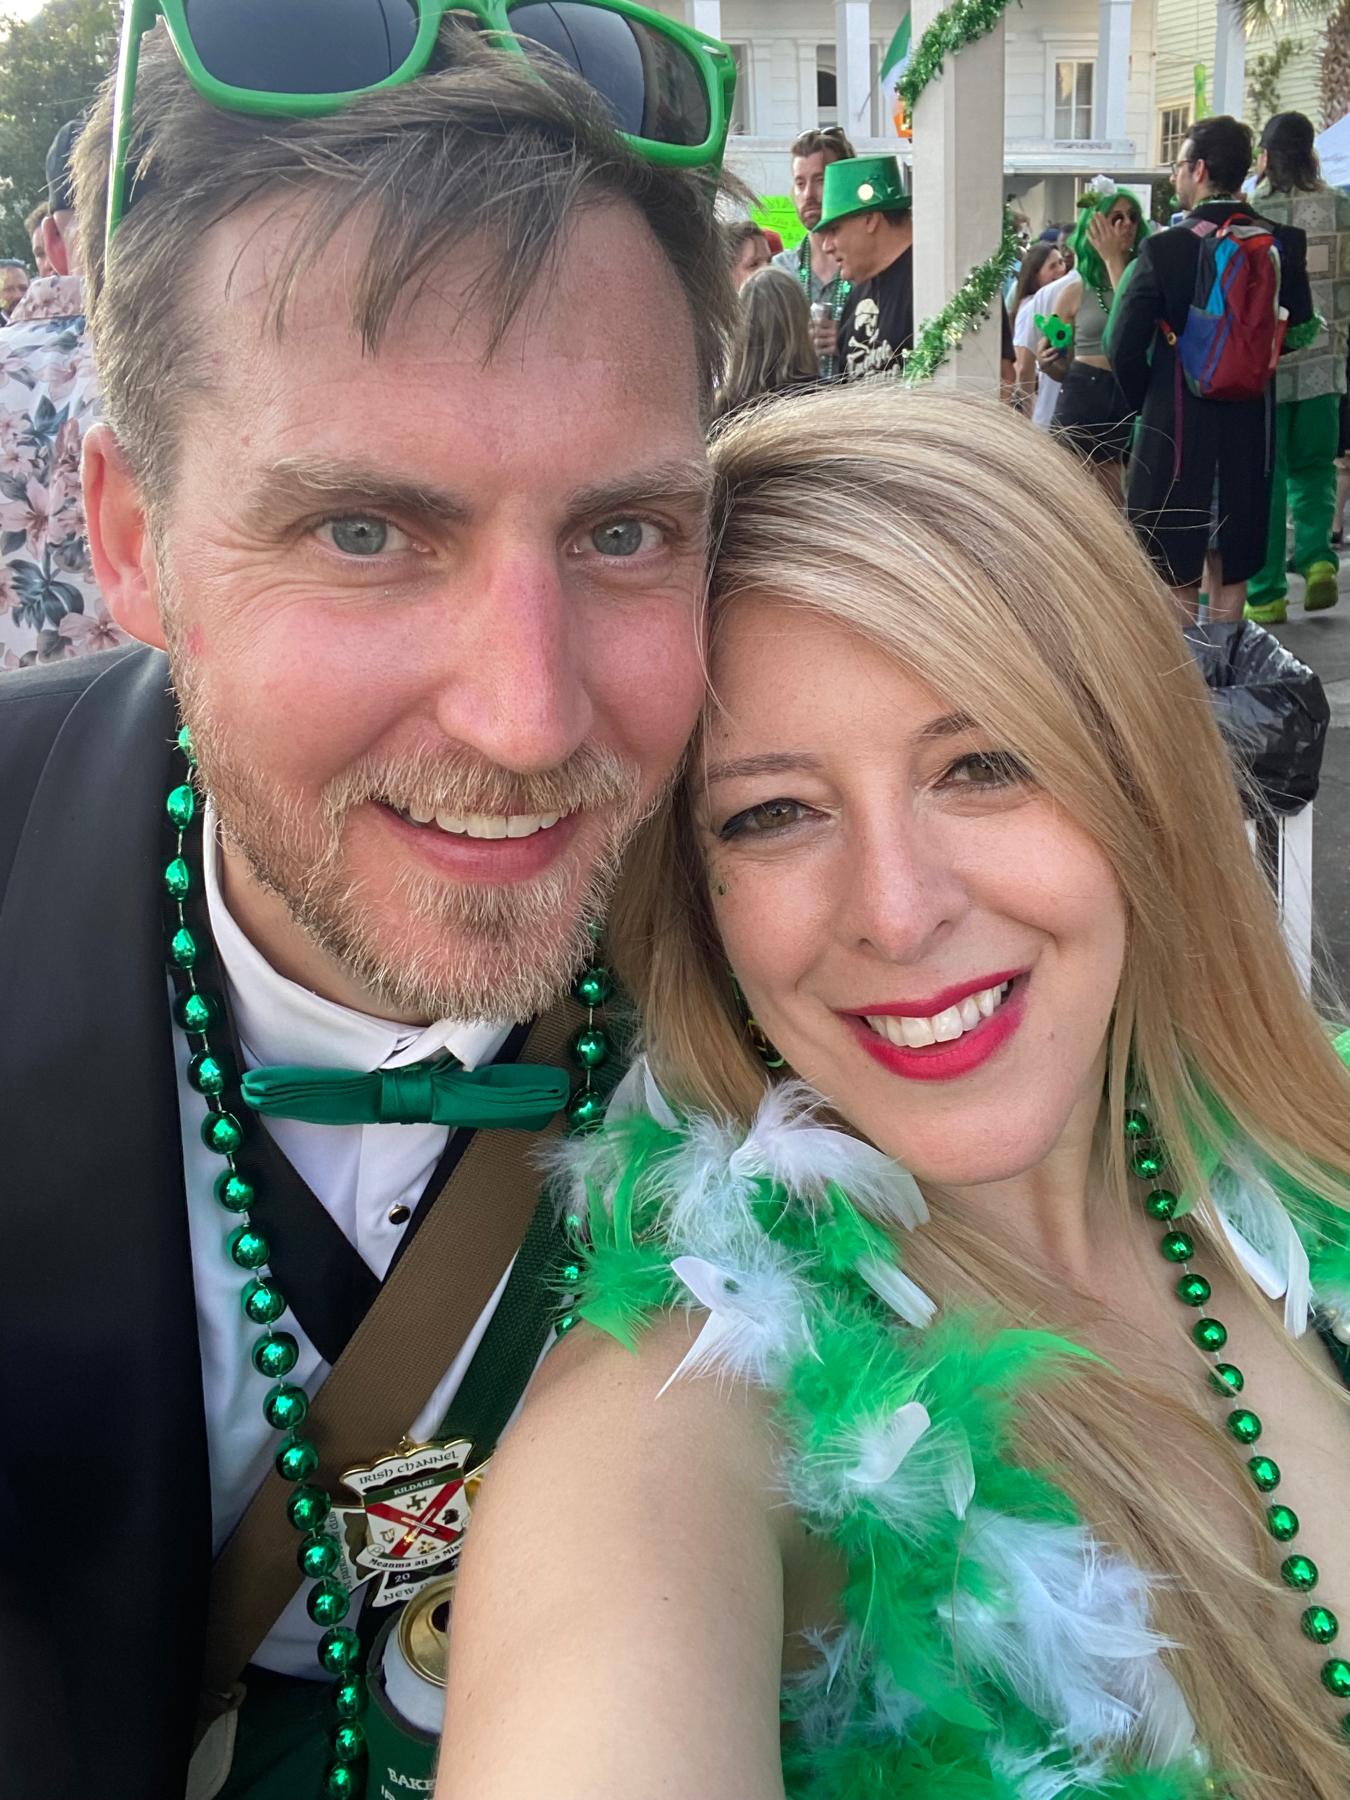 After Kyle marched in the Irish Channel St. Patrick’s day parade